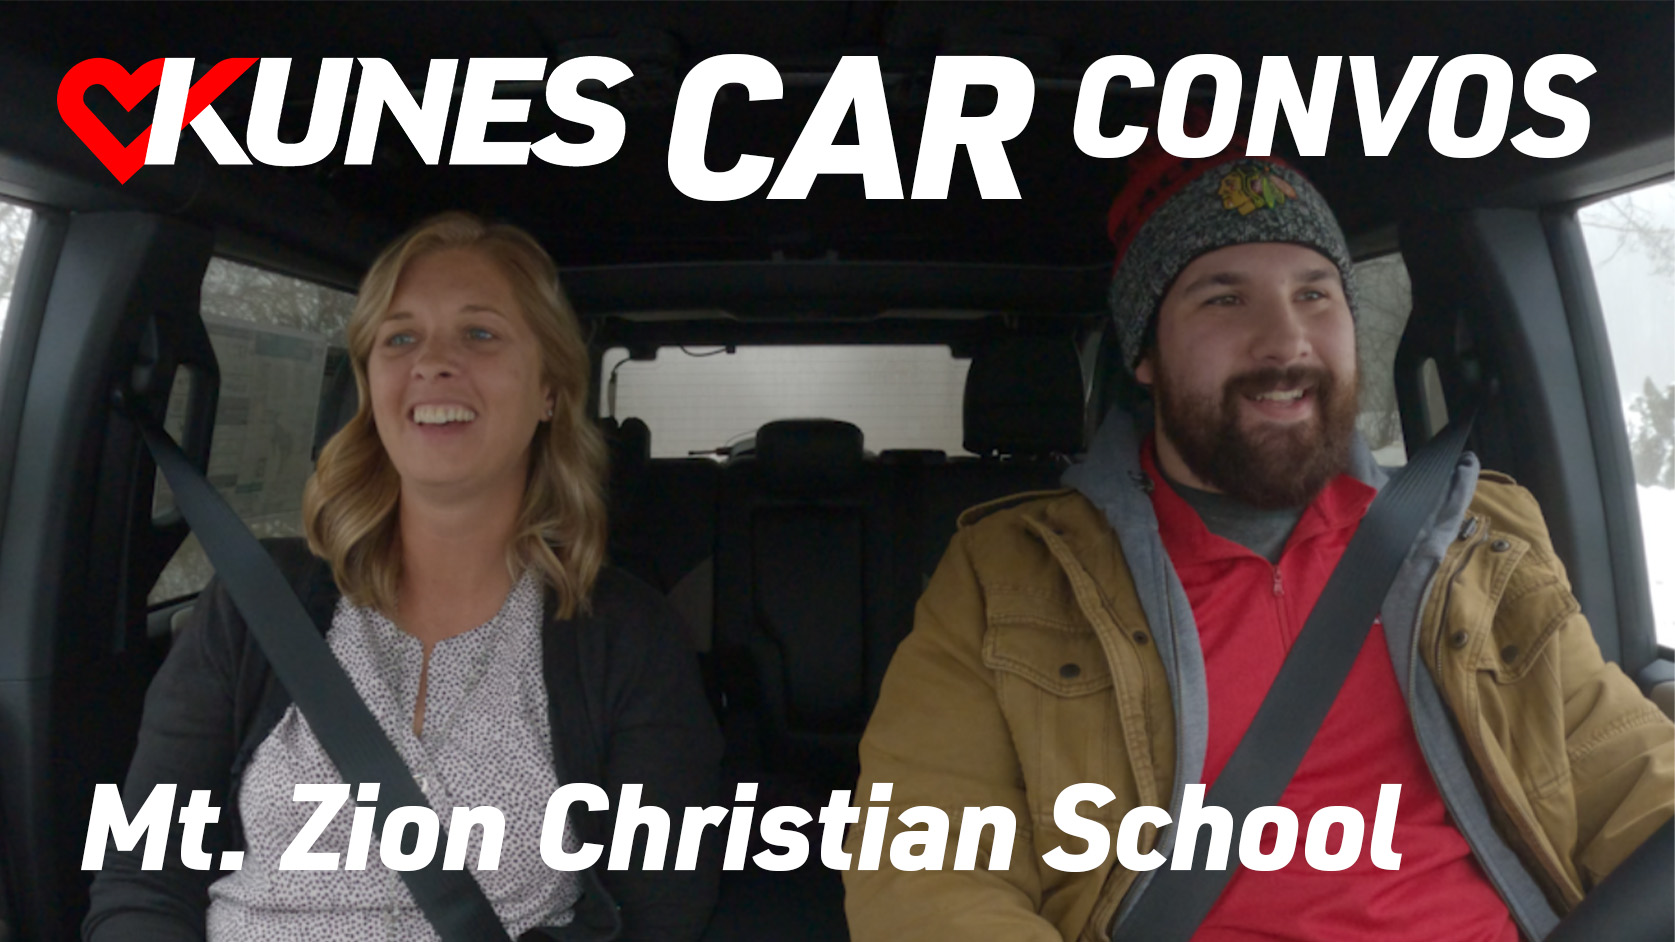 Pictured left to right: Amy Quernemon, principal of Mt. Zion Christian School, and Evan Ferguson, Kunes Auto& RV Group Videographer